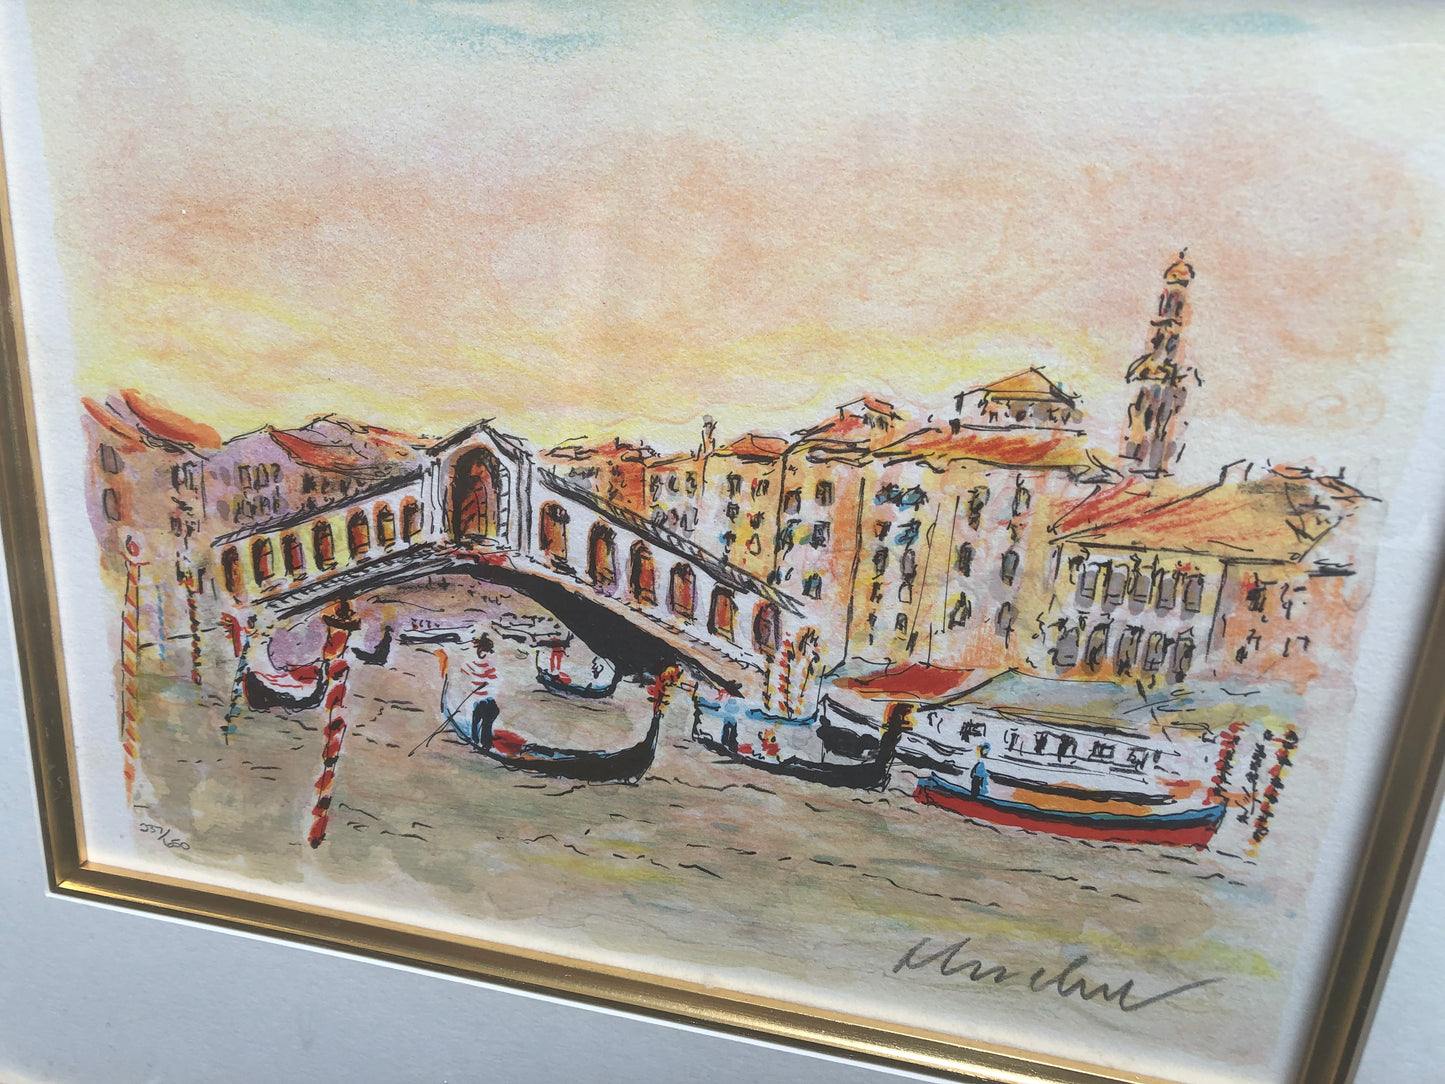 Stunning Venice Lithograph signed and Numbered Framed Art - Pristine!